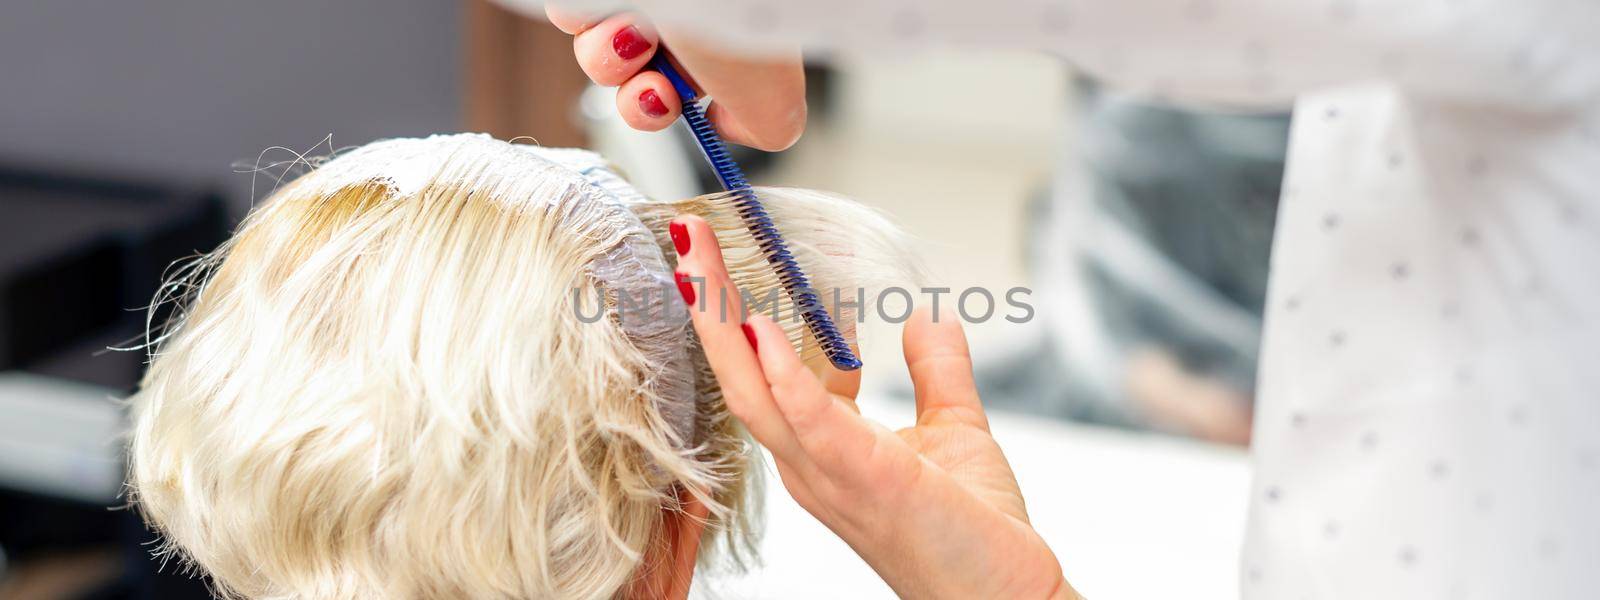 Female hairdresser styling short white hair of the young blonde woman with hands and comb in a hair salon